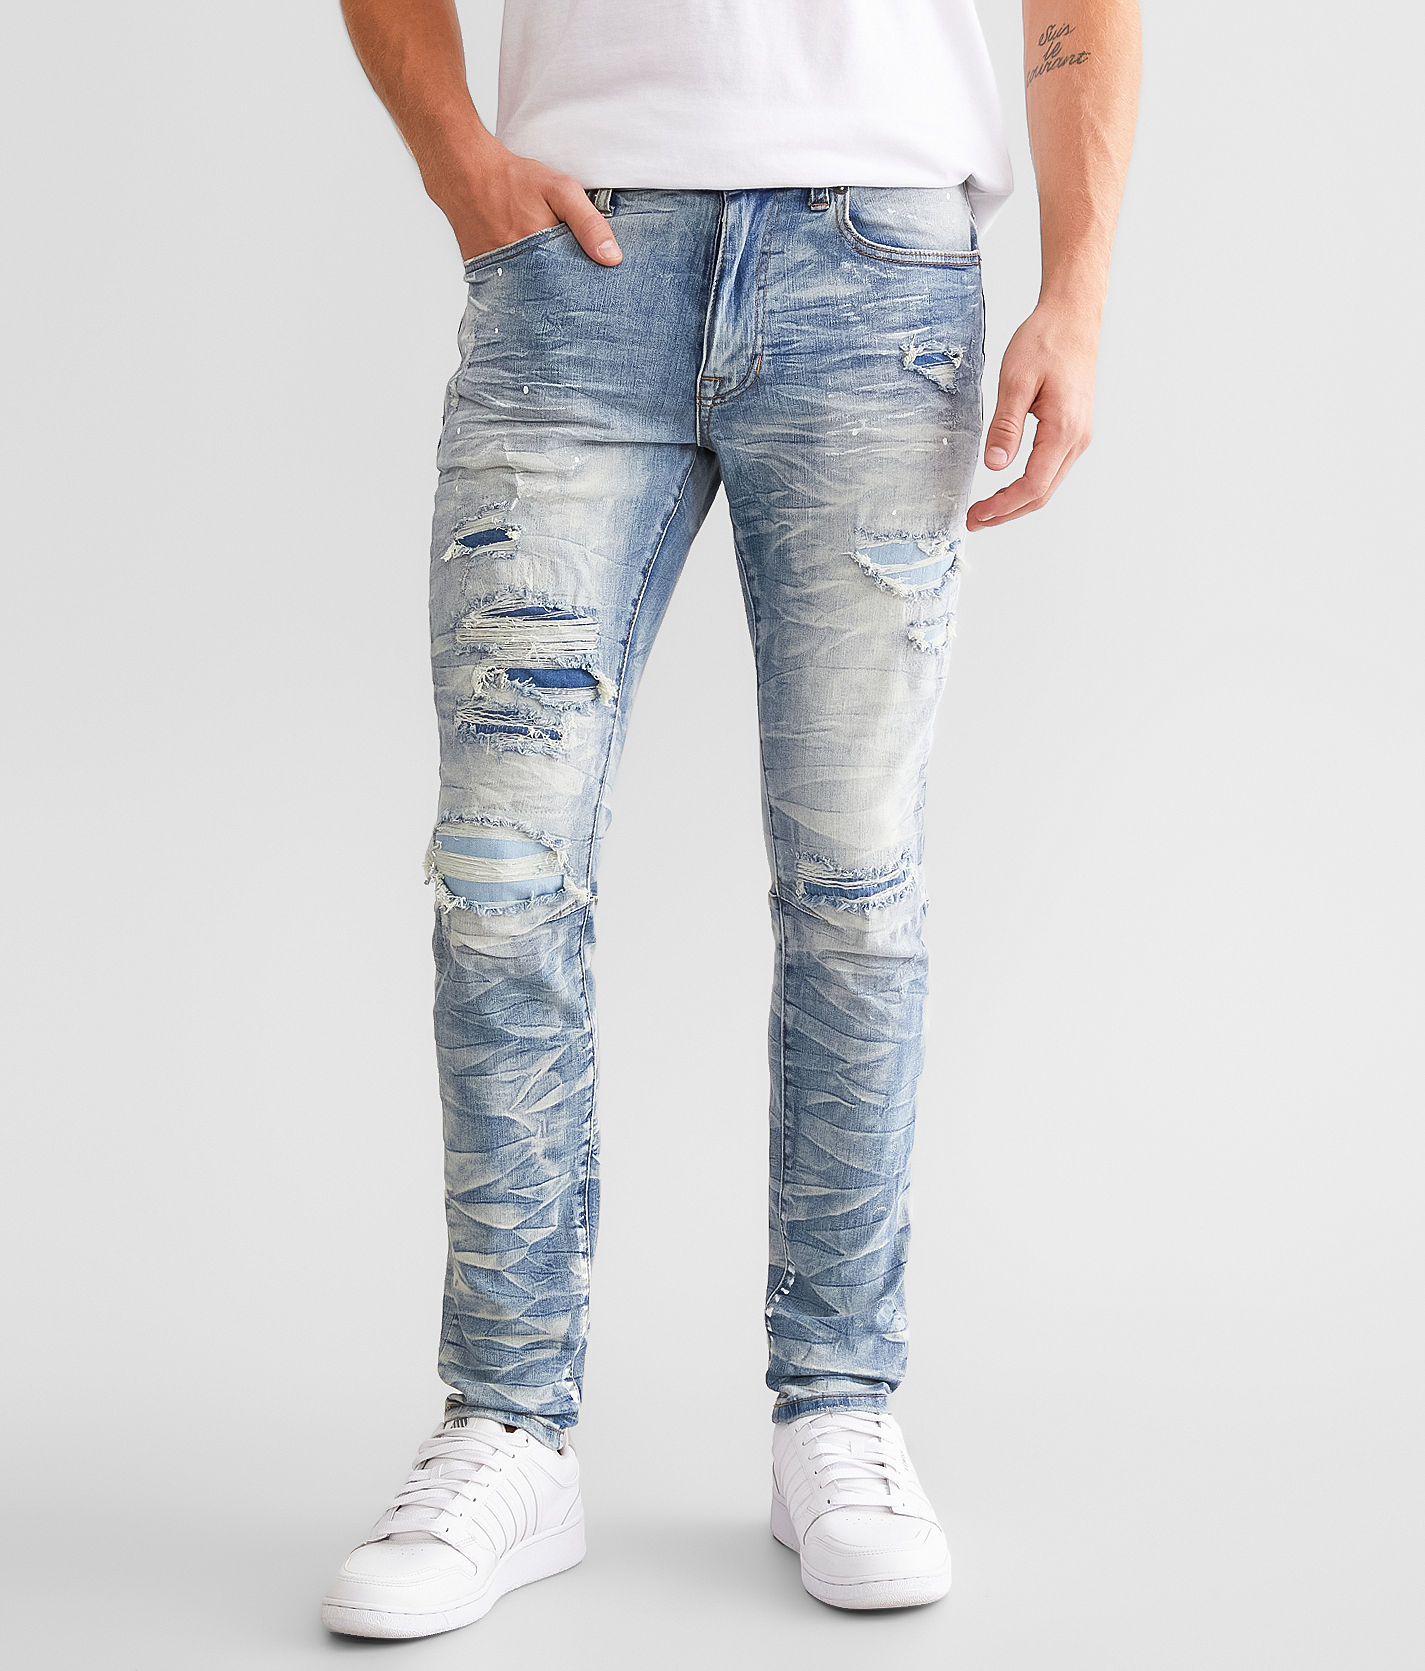 Smoke Rise® Slim Tapered Stretch Jean - Men's Jeans in Clyde